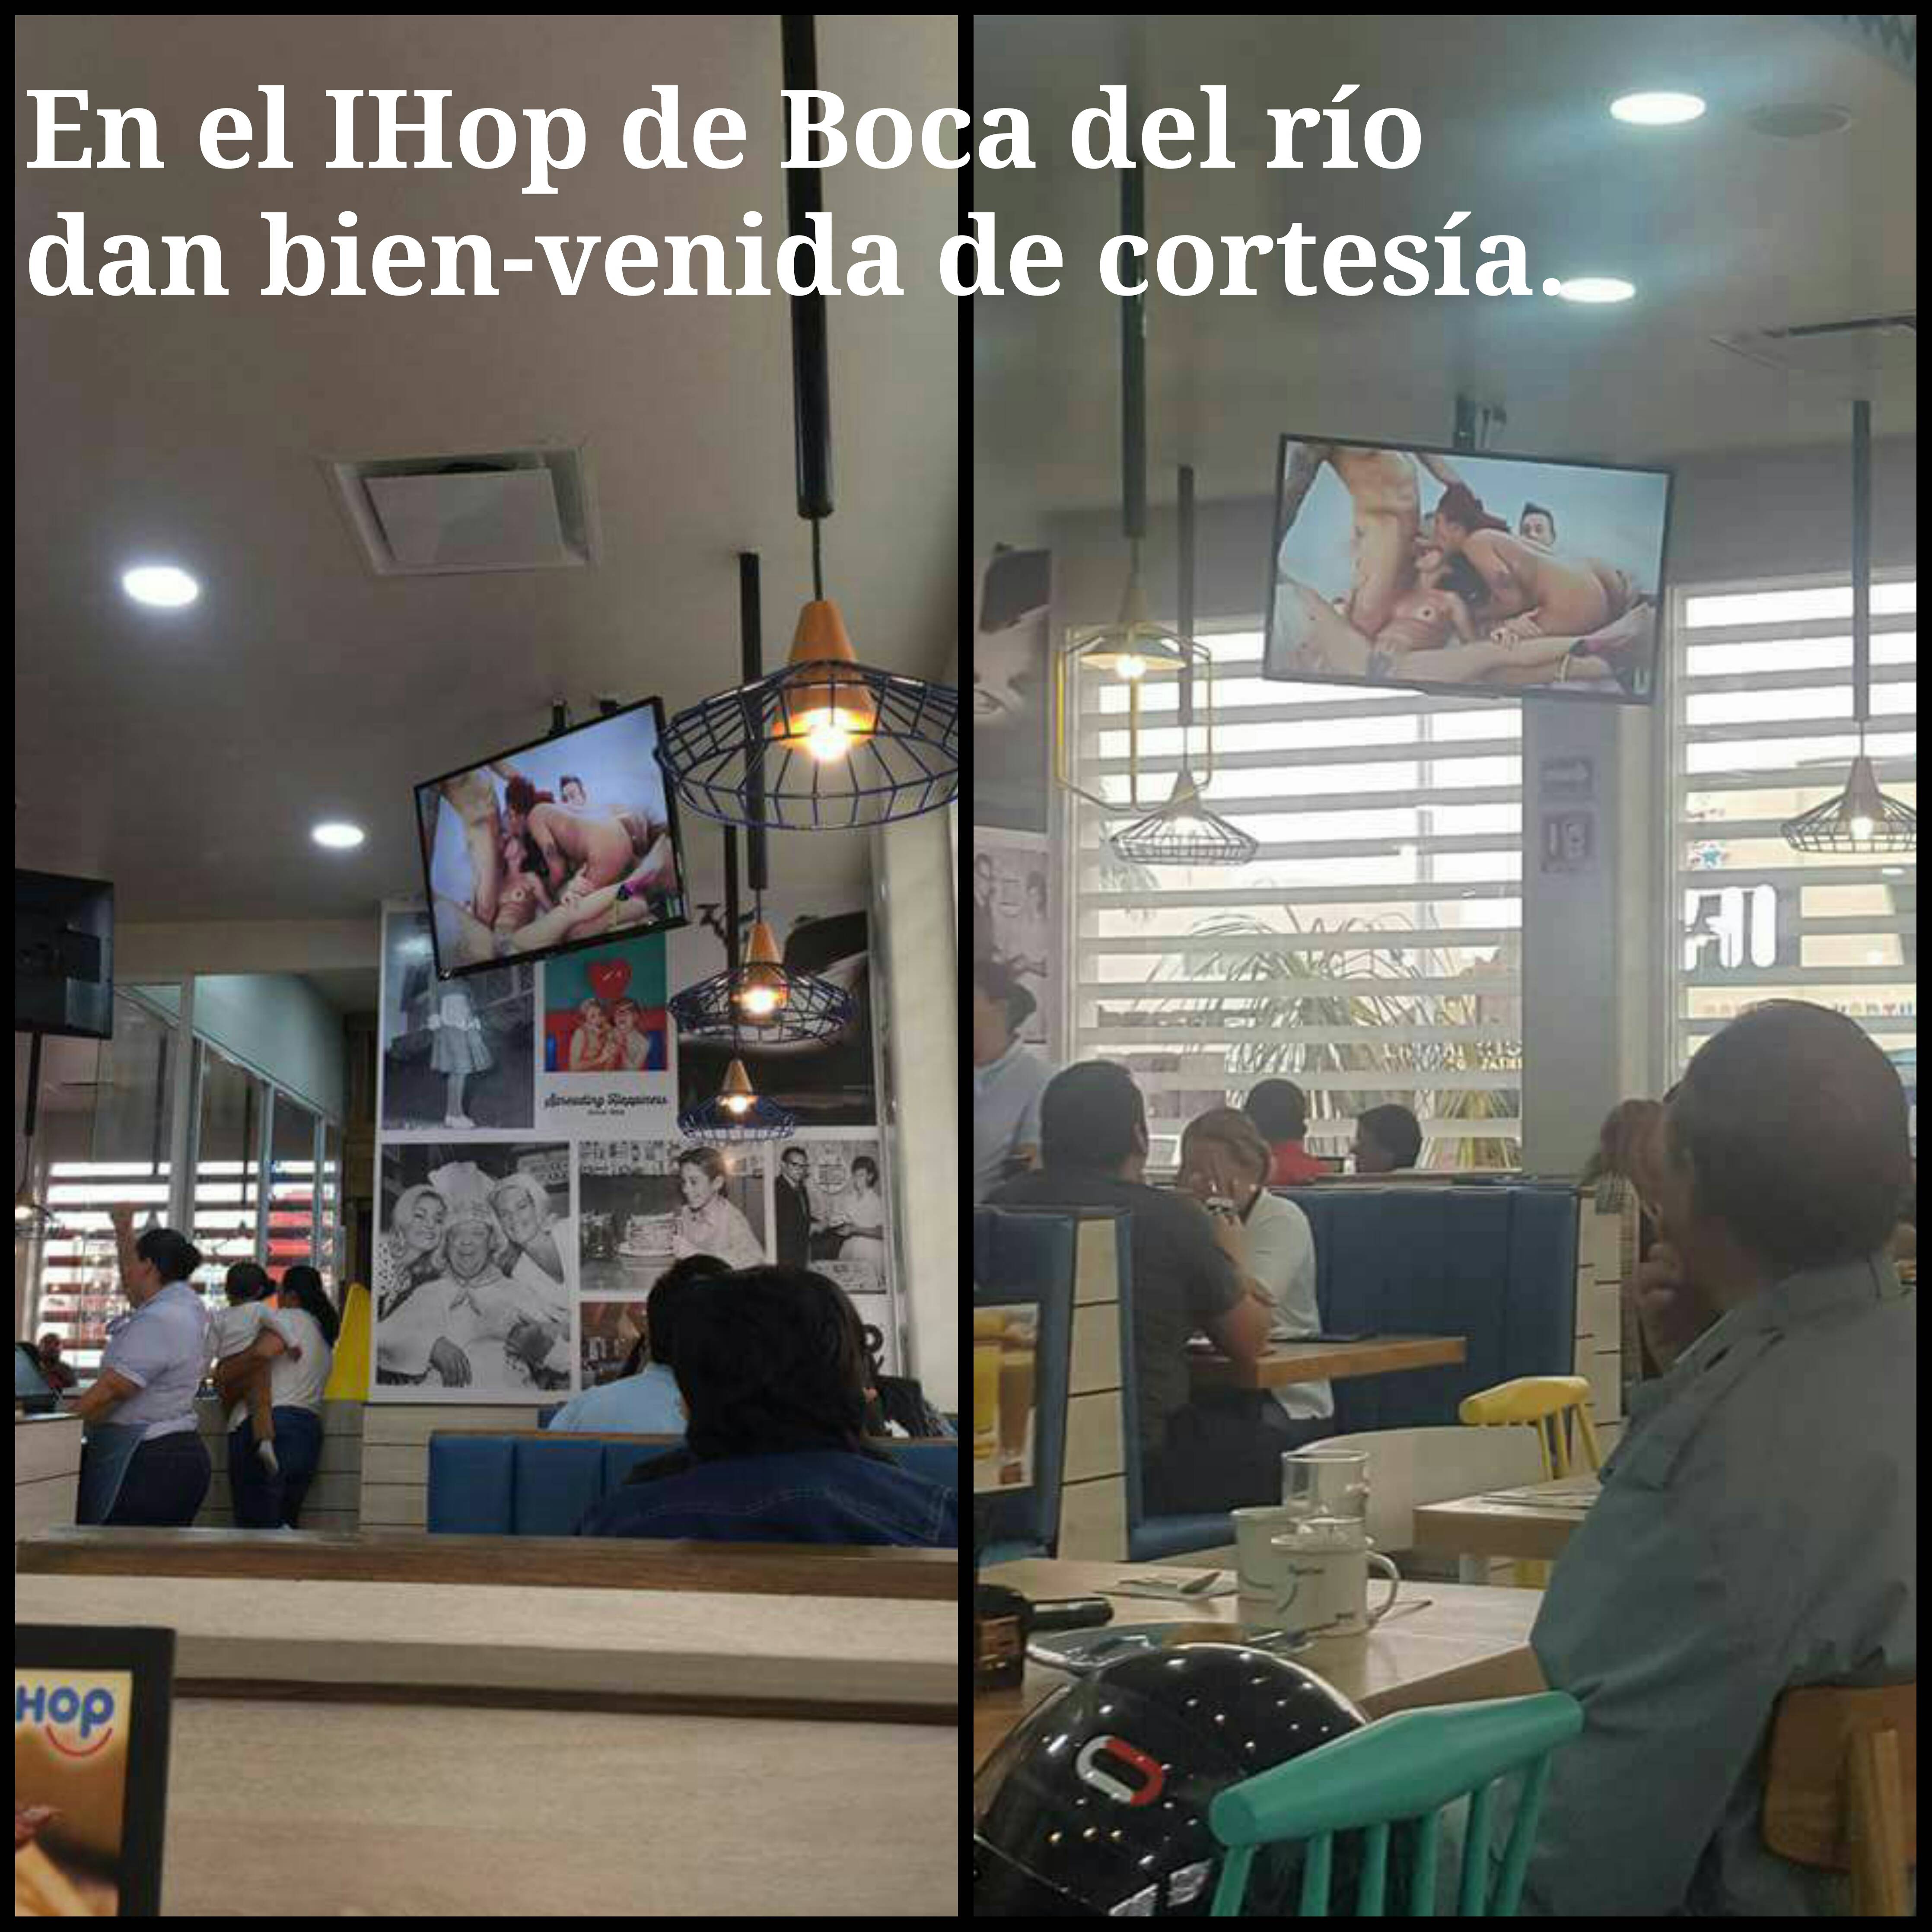 Yesterdey In The Inaguration Of An IHop In Veracruz, Mexico.